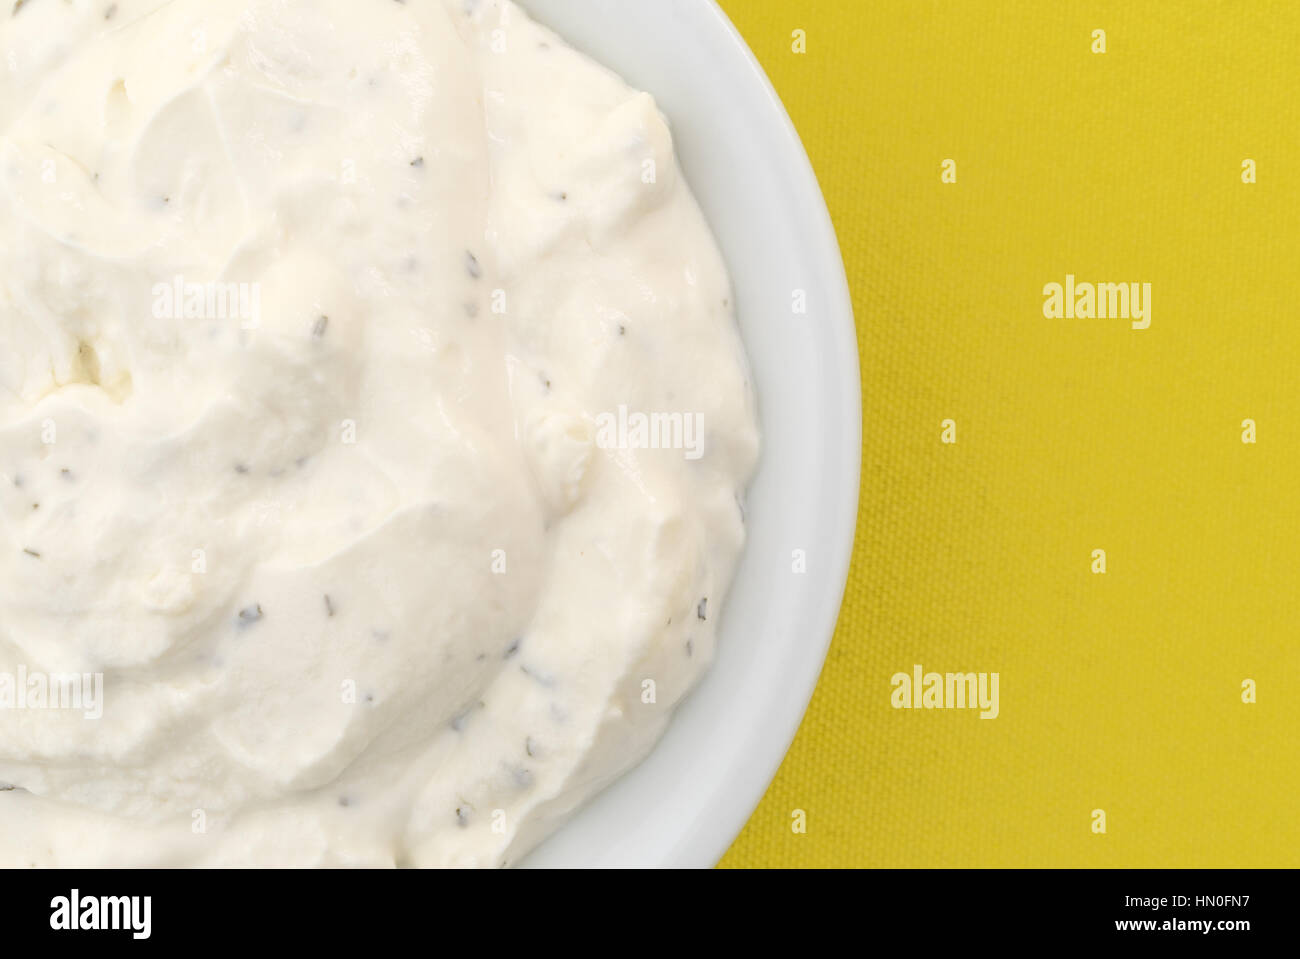 Top close view of  a small bowl filled with fresh French onion dip atop a bright yellow tablecloth. Stock Photo